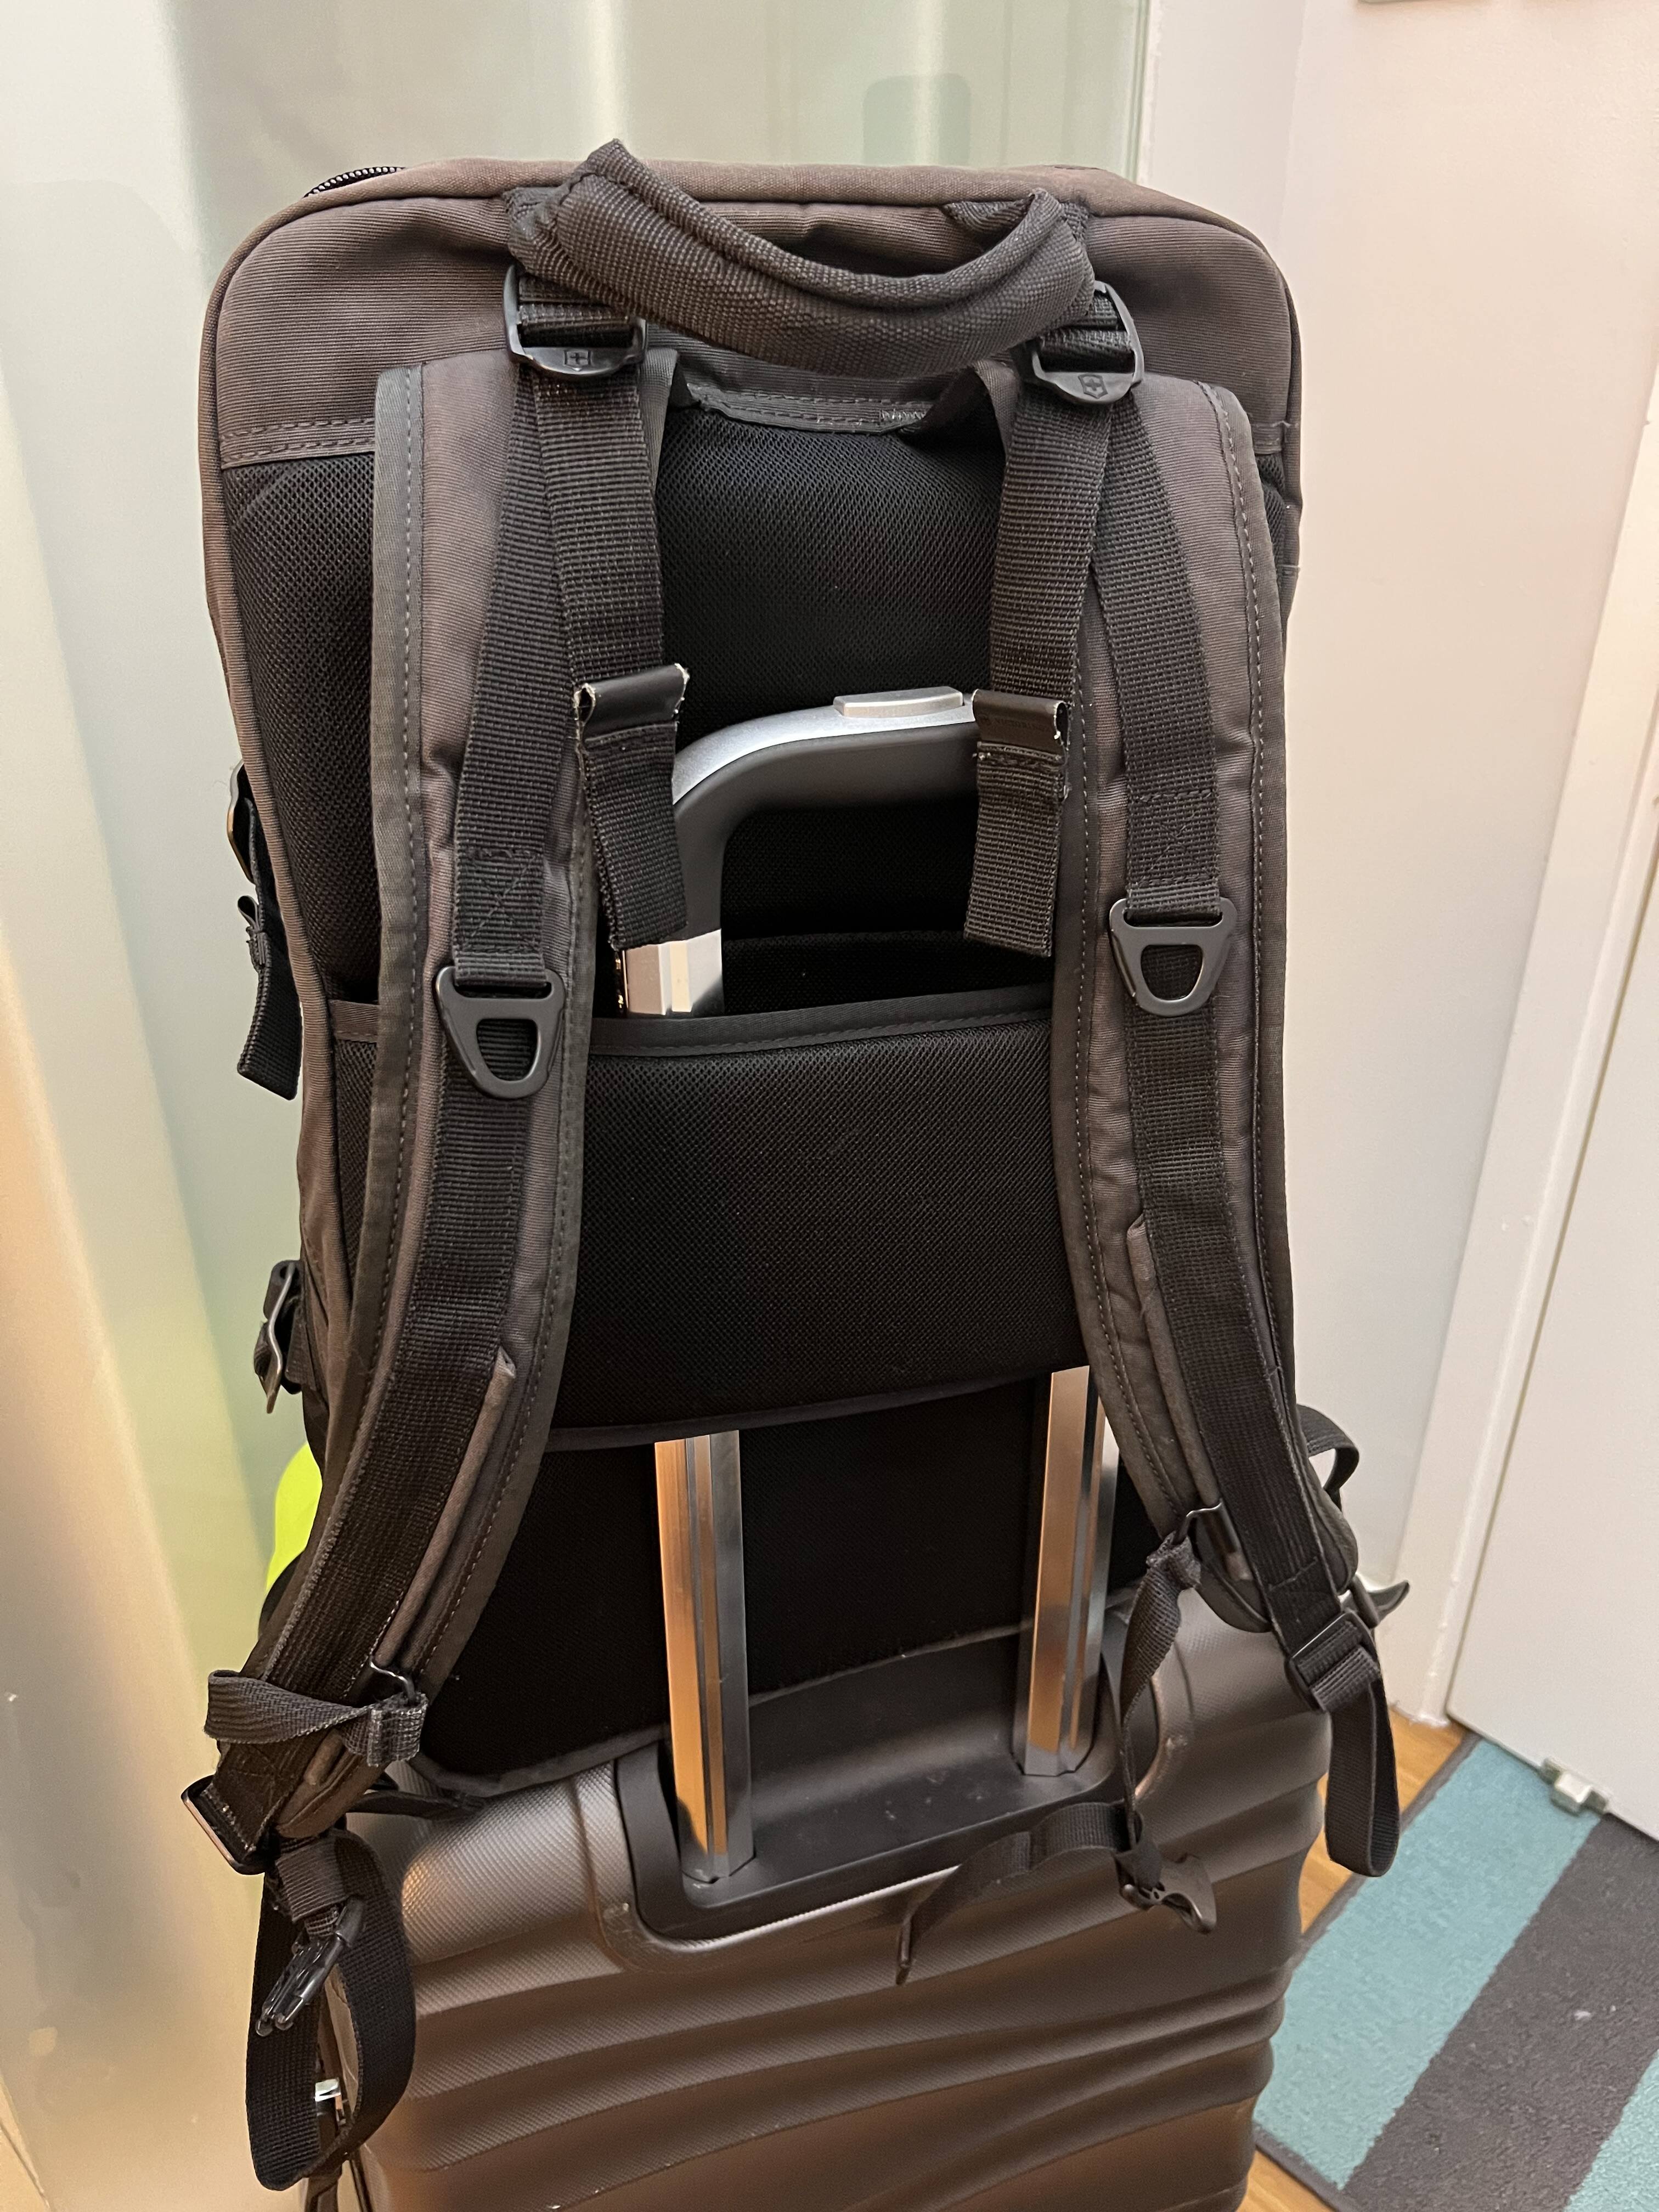 LTT Backpack under seat on Delta and JetBlue Domestic USA flights :  r/LinusTechTips